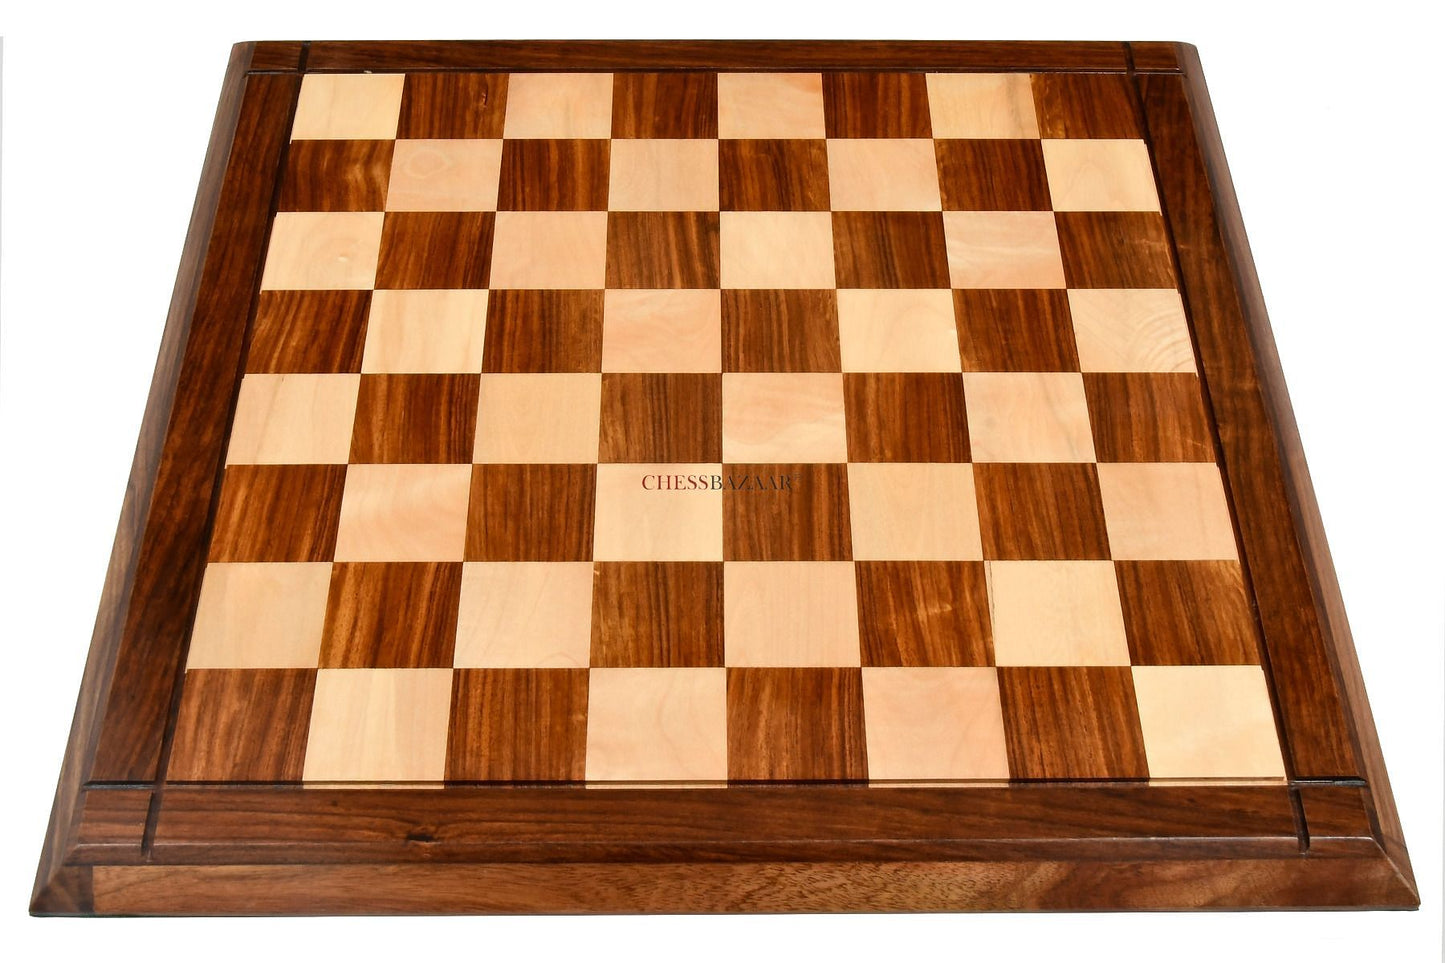 Deluxe Sheesham Solid Wood Maple Wooden Chess Board 21" - 55 mm